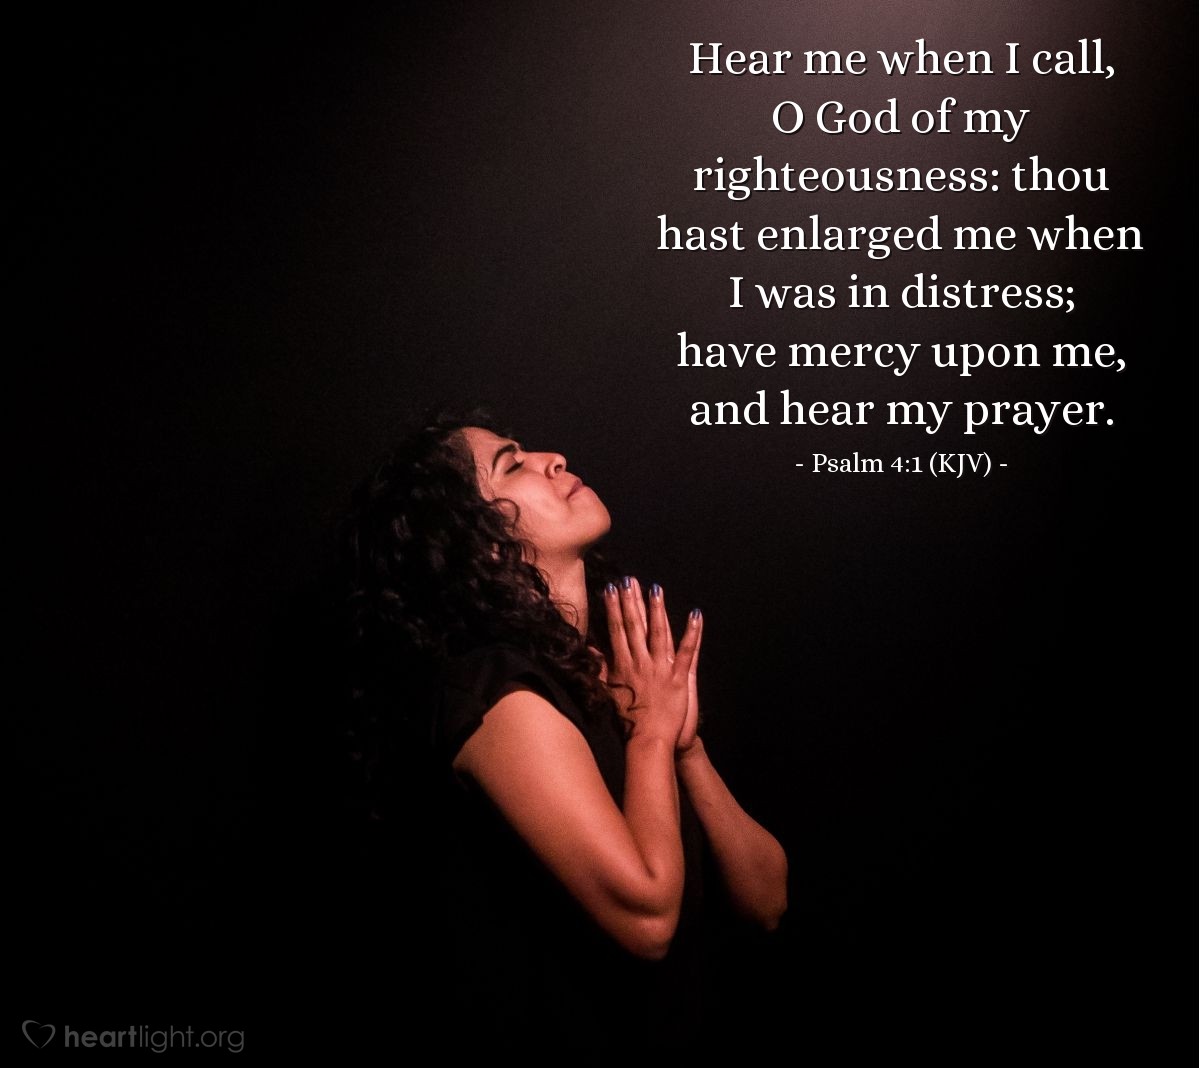 Illustration of Psalm 4:1 (KJV) — Hear me when I call, O God of my righteousness: thou hast enlarged me when I was in distress; have mercy upon me, and hear my prayer.